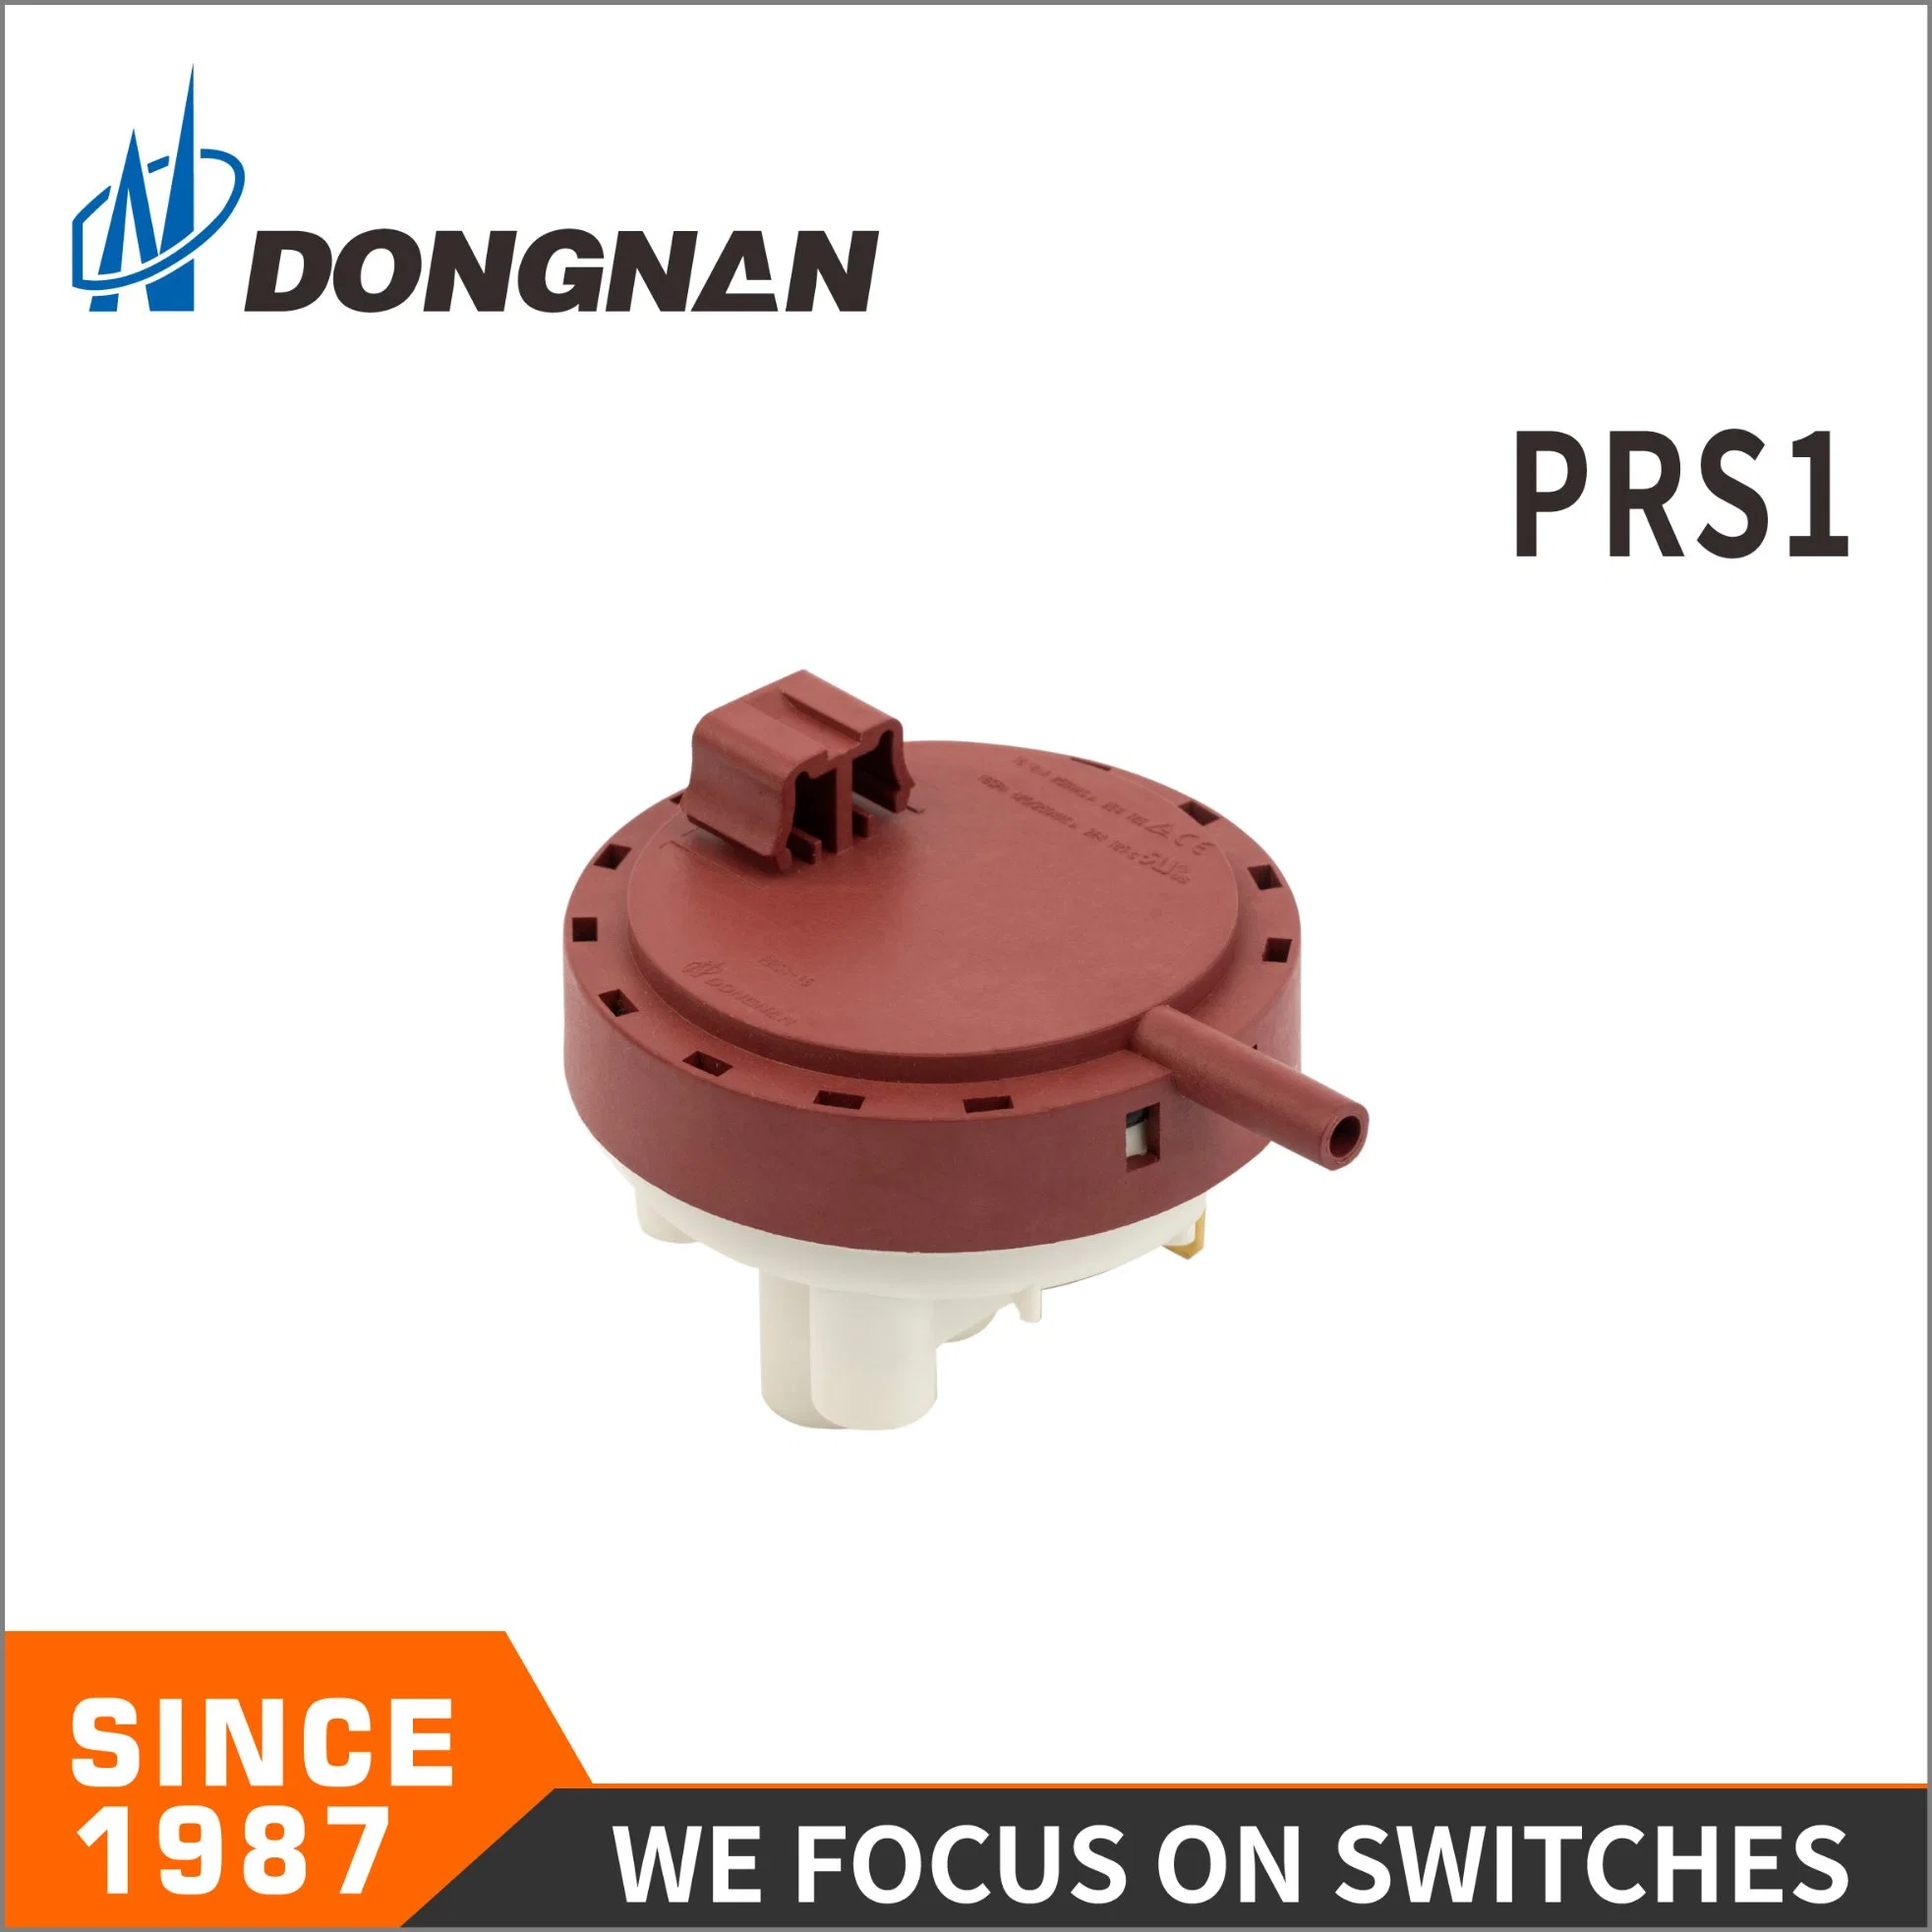 Prs1 Dishwashers and Other Home Appliances and Similar Equipment Switch